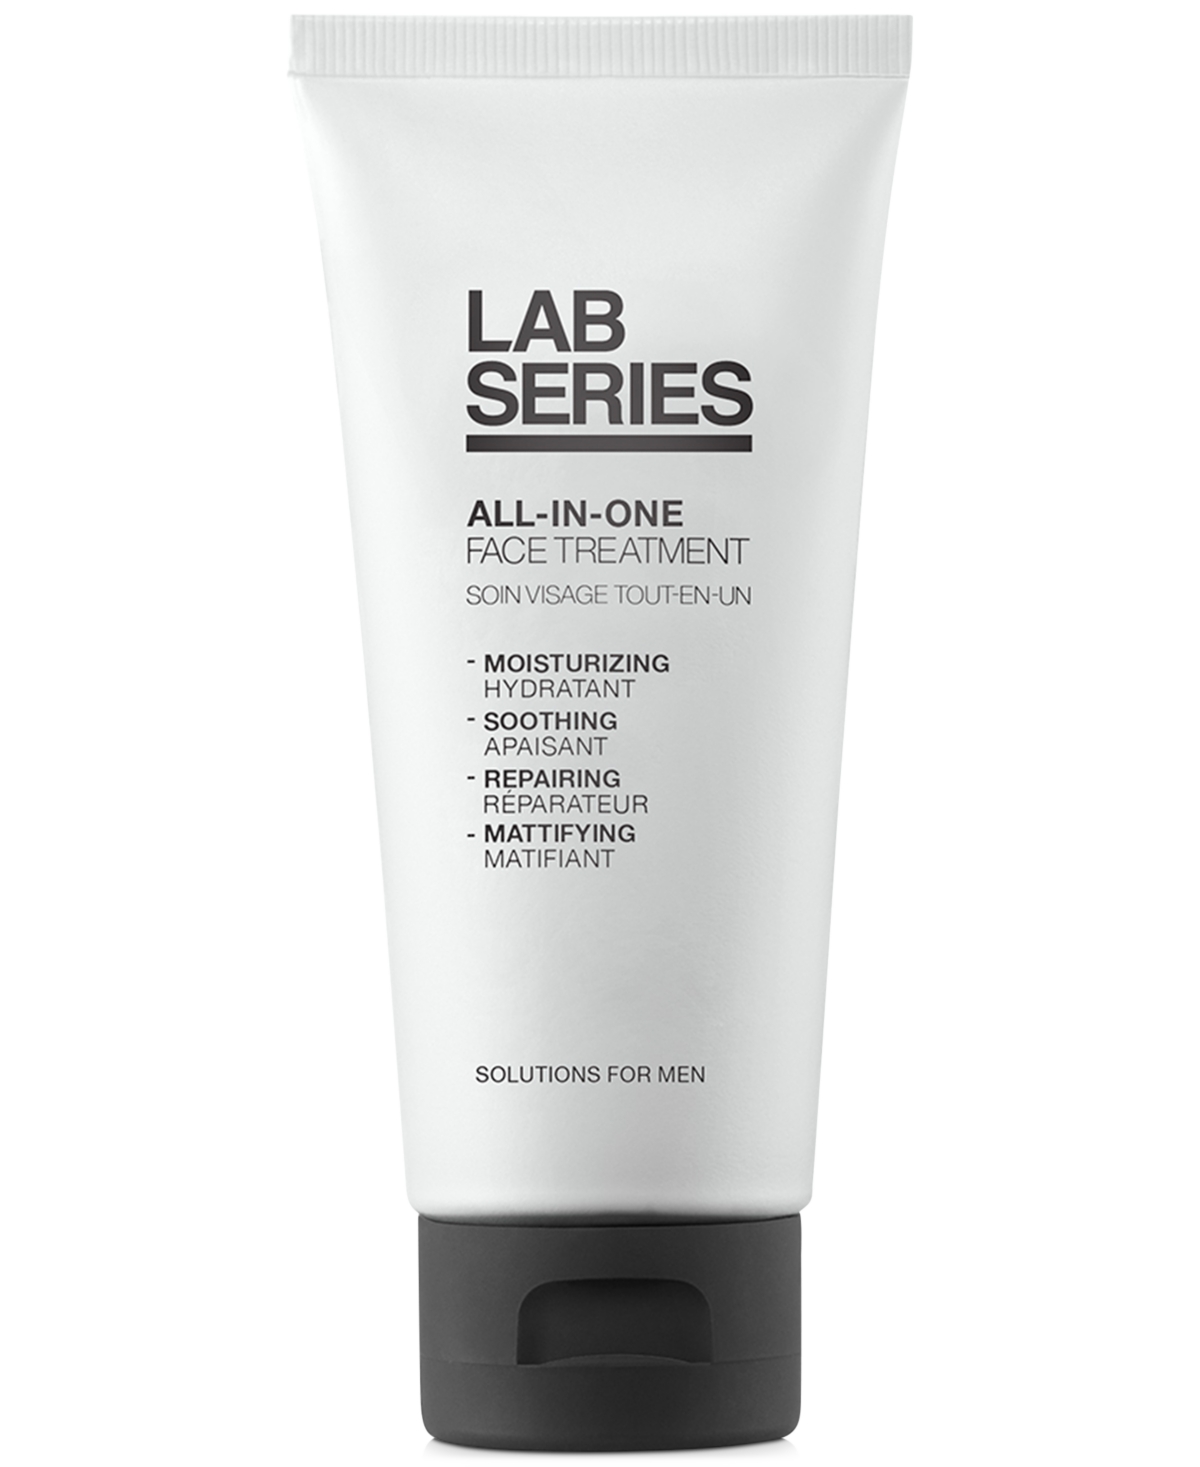 Skincare for Men All-In-One Face Treatment, 1.7-oz.